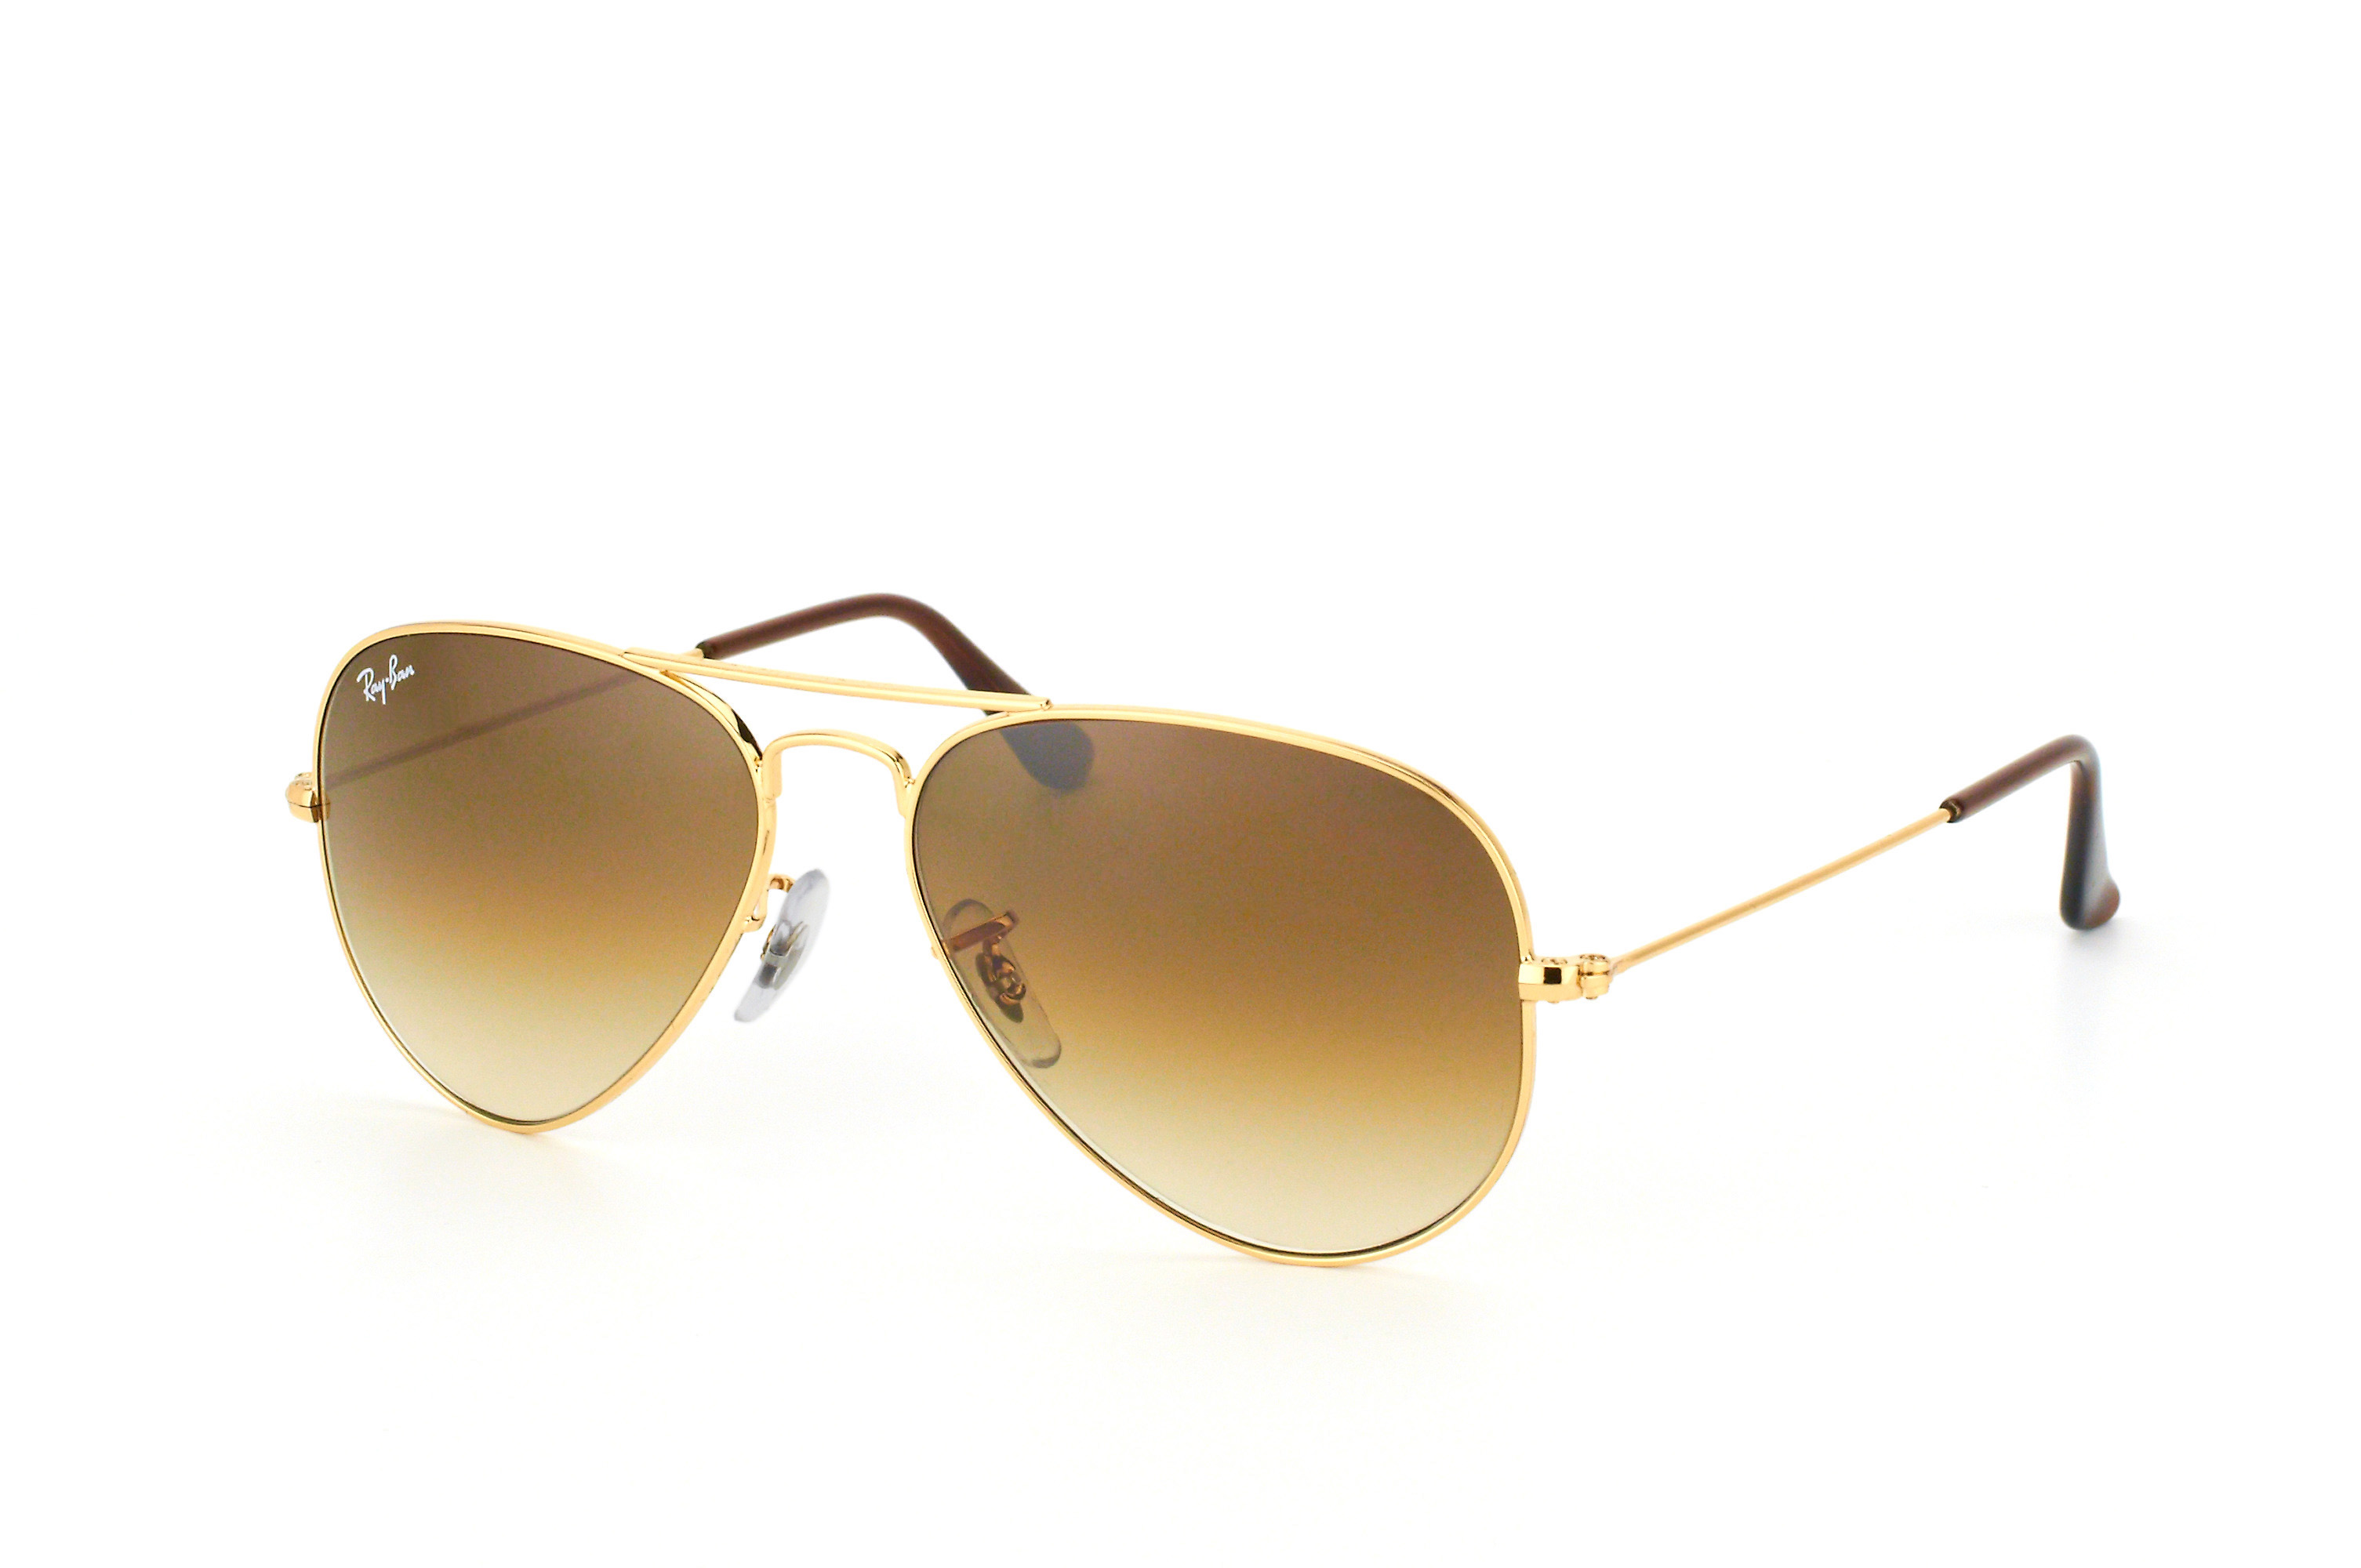 site shop Exclusion Buy Ray-Ban Aviator RB 3025 001/51 small Sunglasses